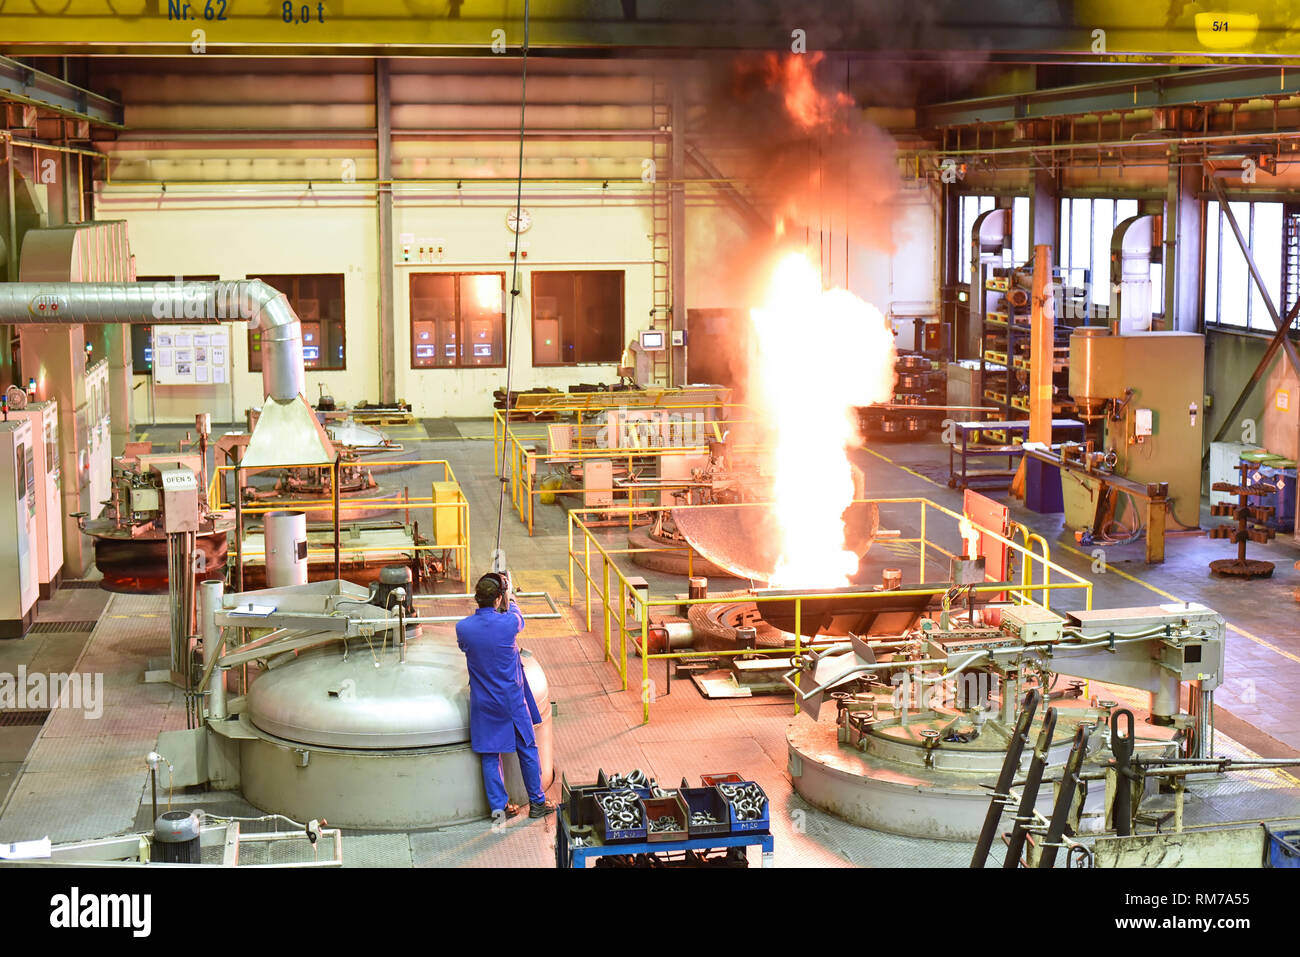 industry - hardening shop with blast furnace and equipment Stock Photo